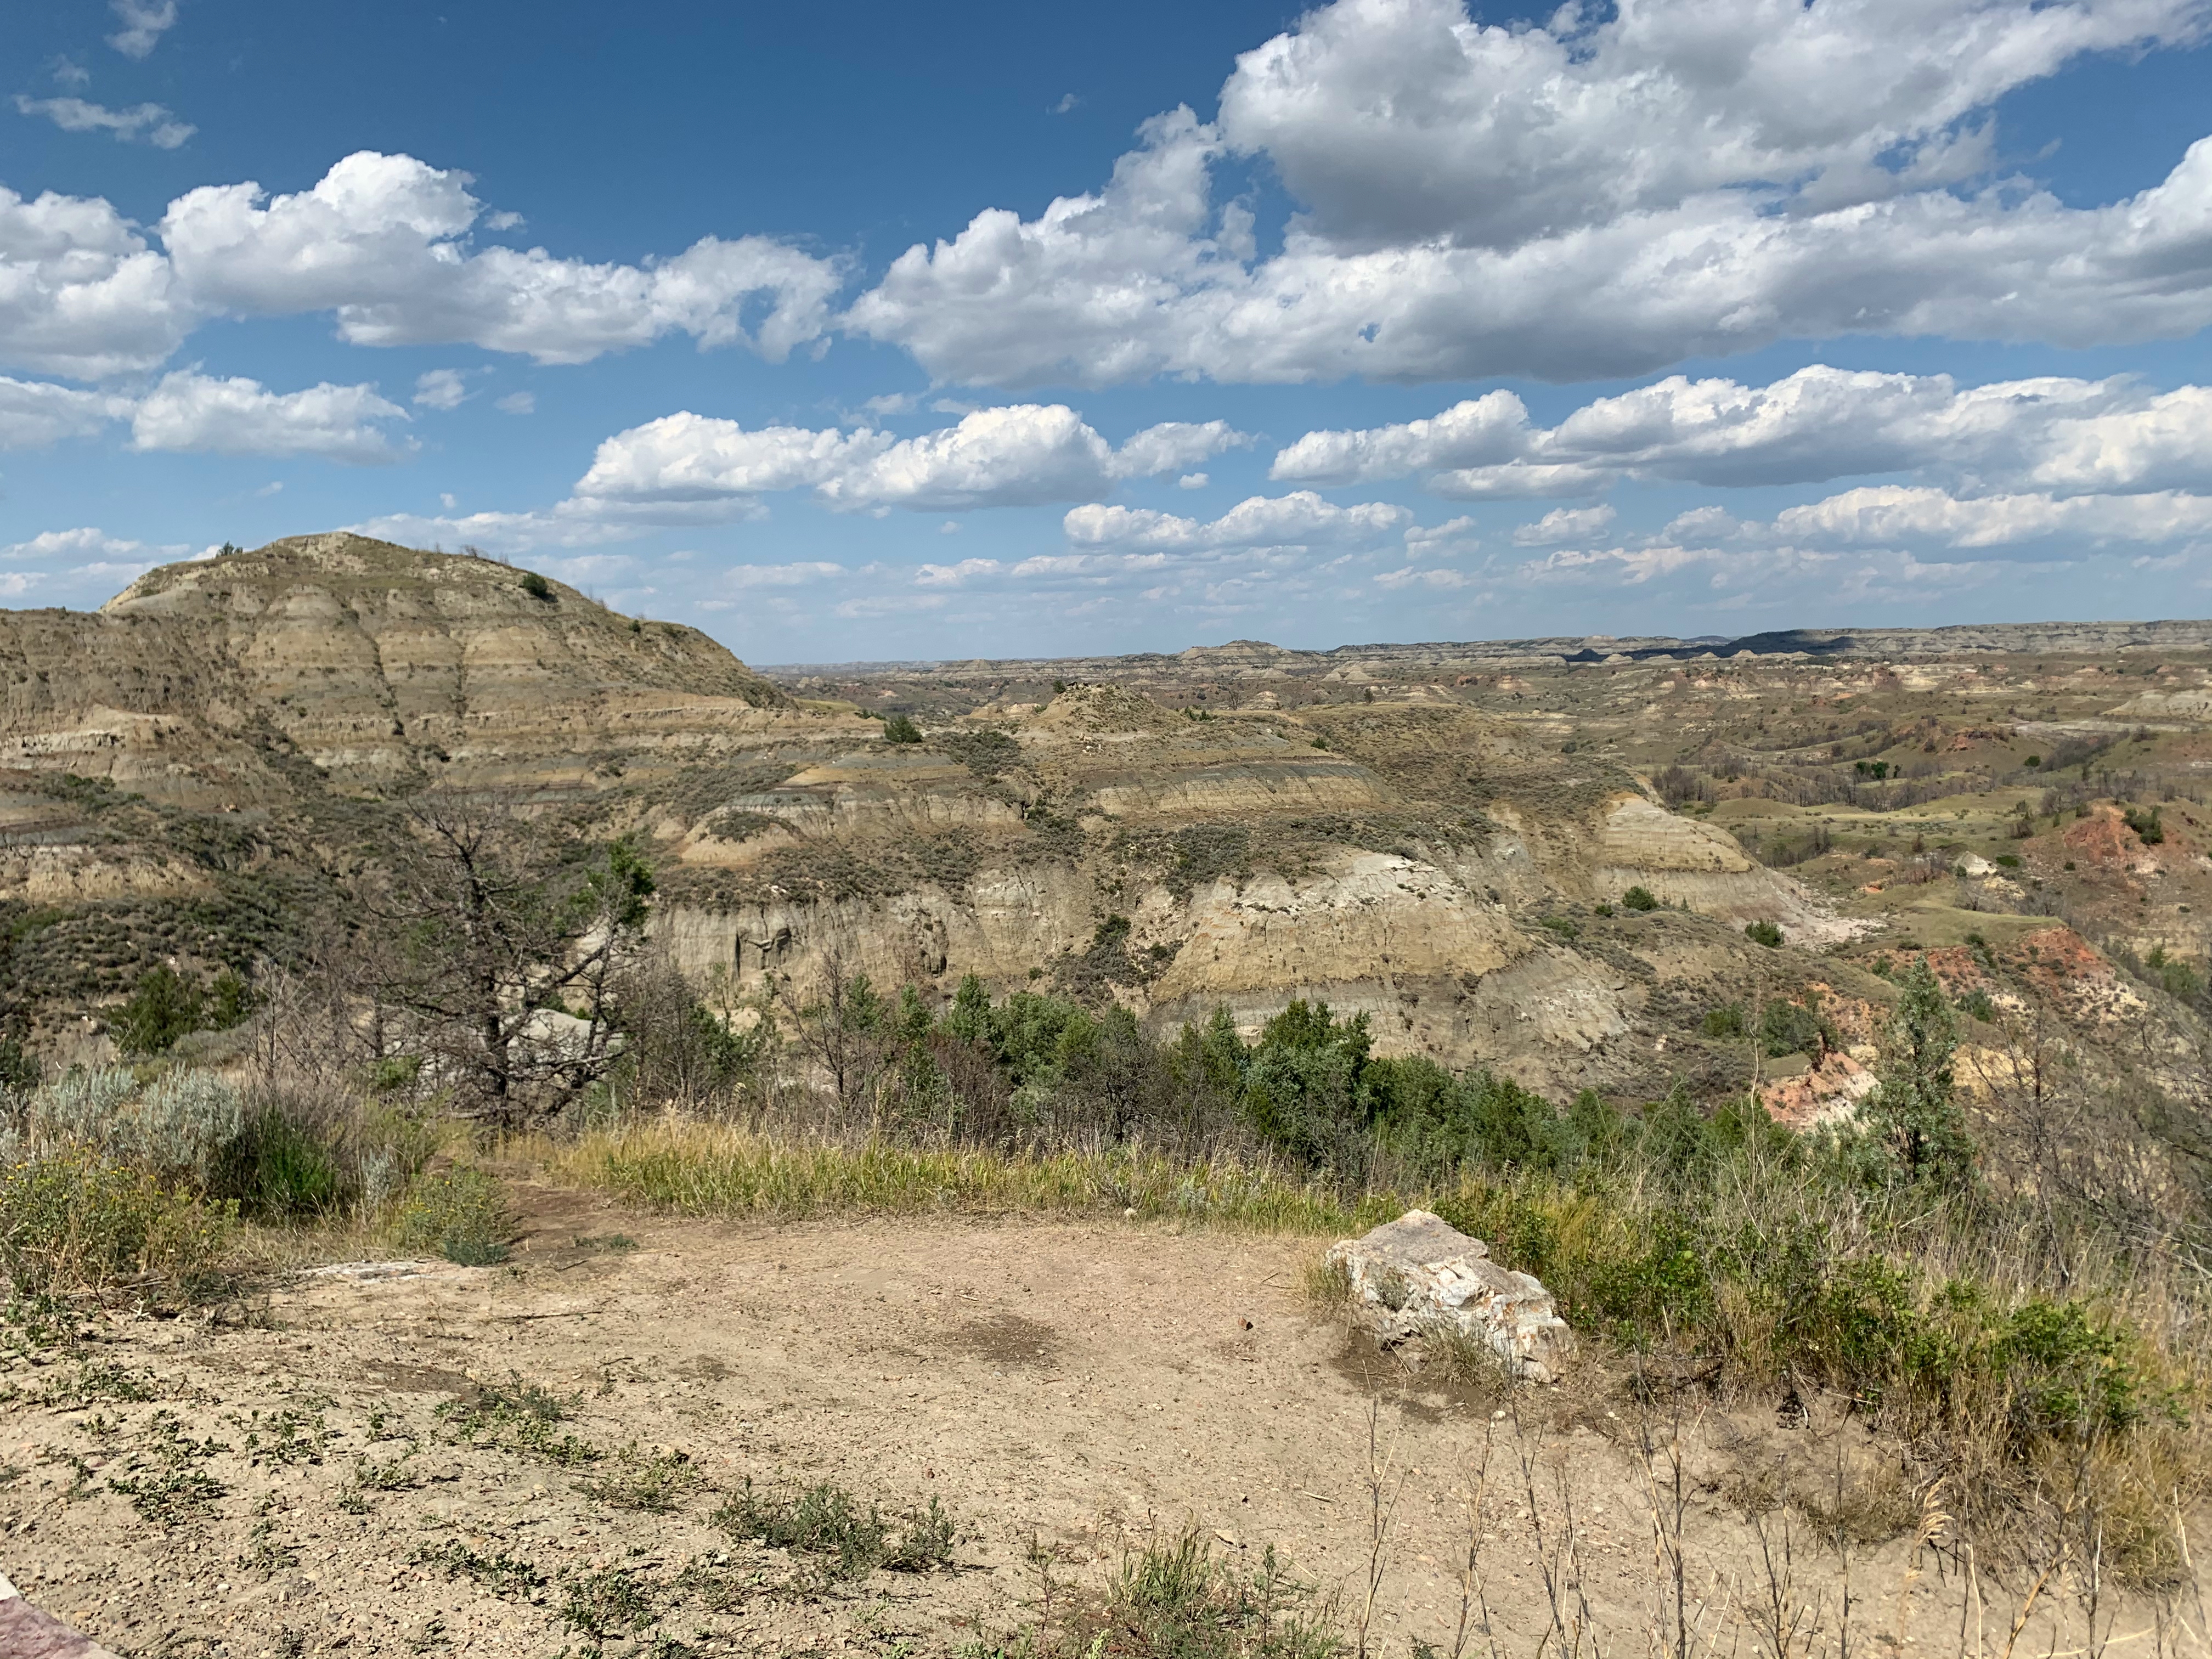 Scenery in Theodore Roosevelt National Park